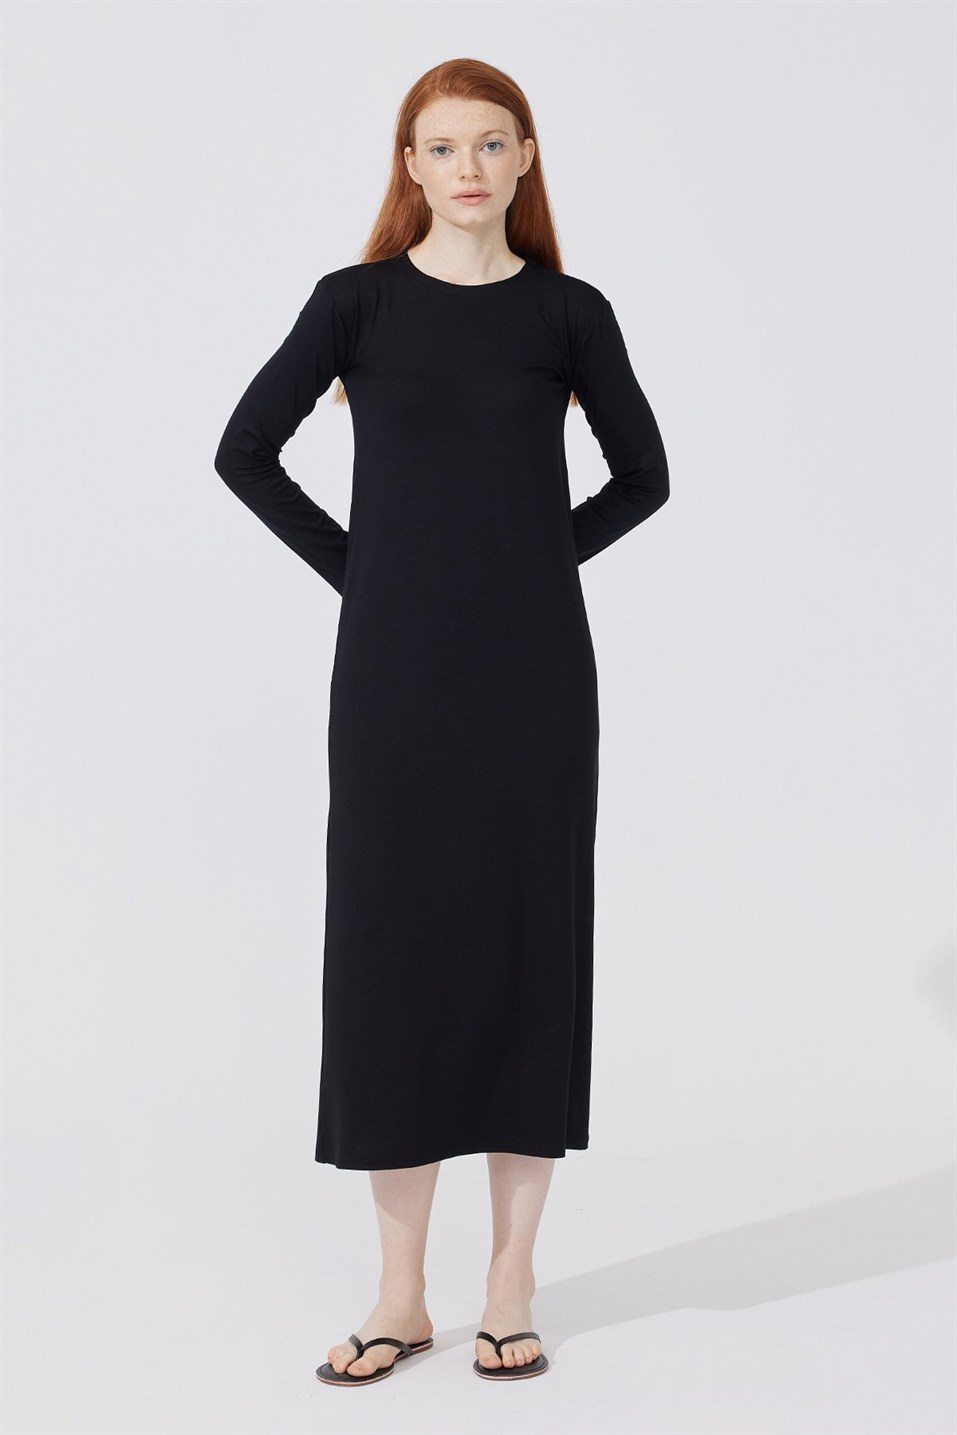 Black Long Sleeve Lined Combed Cotton Dress